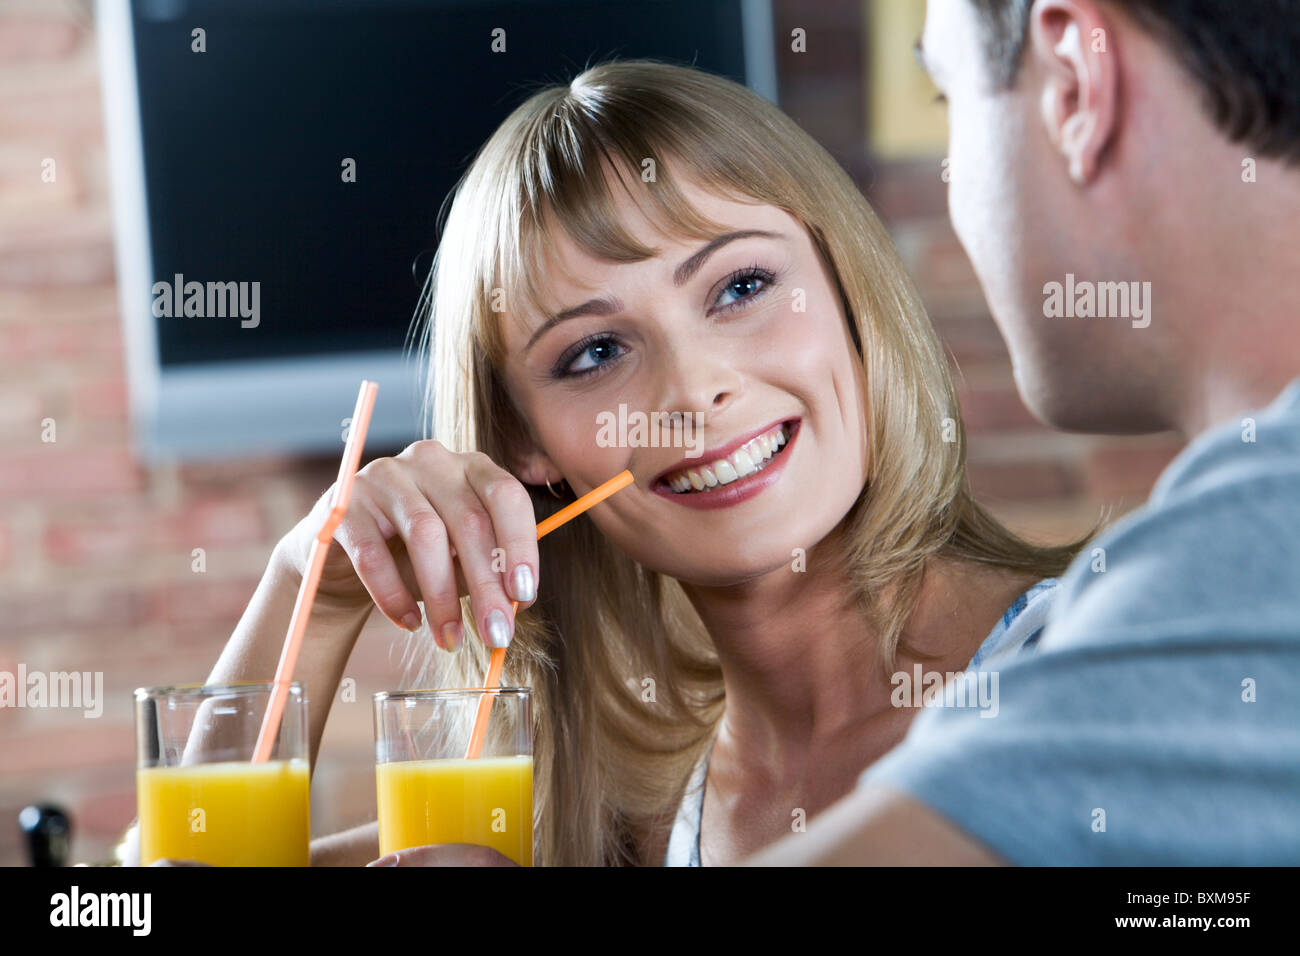 Smiling cute blond woman listening to her male companion while drinking orange juice in the bar Stock Photo